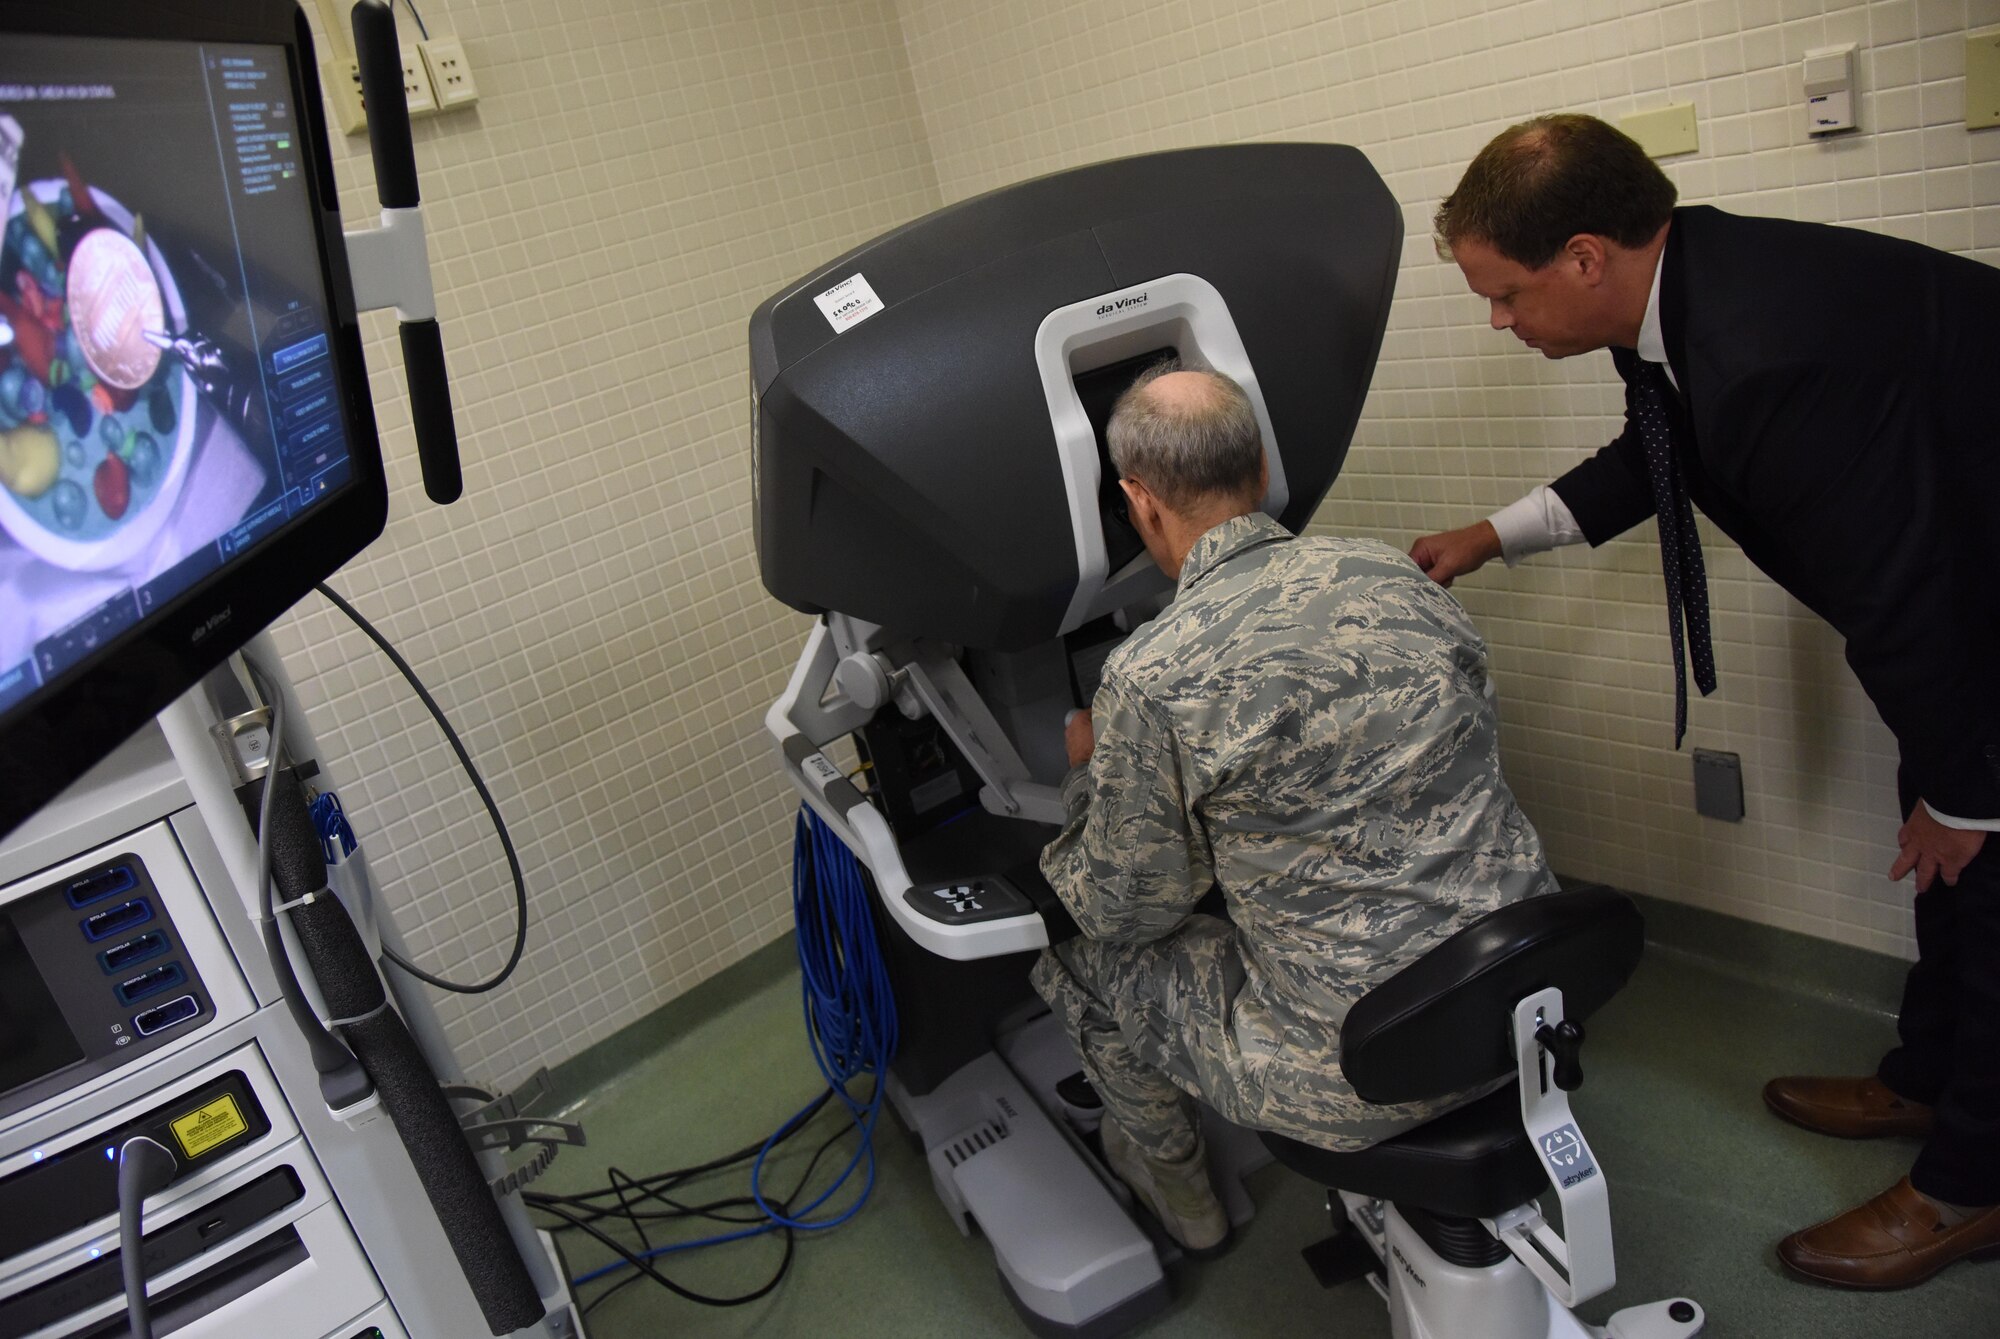 Blaise Provitola, Intuitive Surgical Inc. area sales manager, guides Lt. Gen. Mark Ediger, Air Force Surgeon General, as he operates a da Vinci surgical system, which is used for robotics surgeries, during a visit to the clinical research laboratory Oct. 17, 2017, on Keesler Air Force Base, Mississippi. The purpose of Ediger’s visit was to get familiar with the 81st Medical Group’s mission, operations and personnel. During his tour, he visited more than 10 different units in the 81st MDG to include mammography, emergency department, radiology and oncology, genetics and the clinical research laboratory. (U.S. Air Force photo by Kemberly Groue)